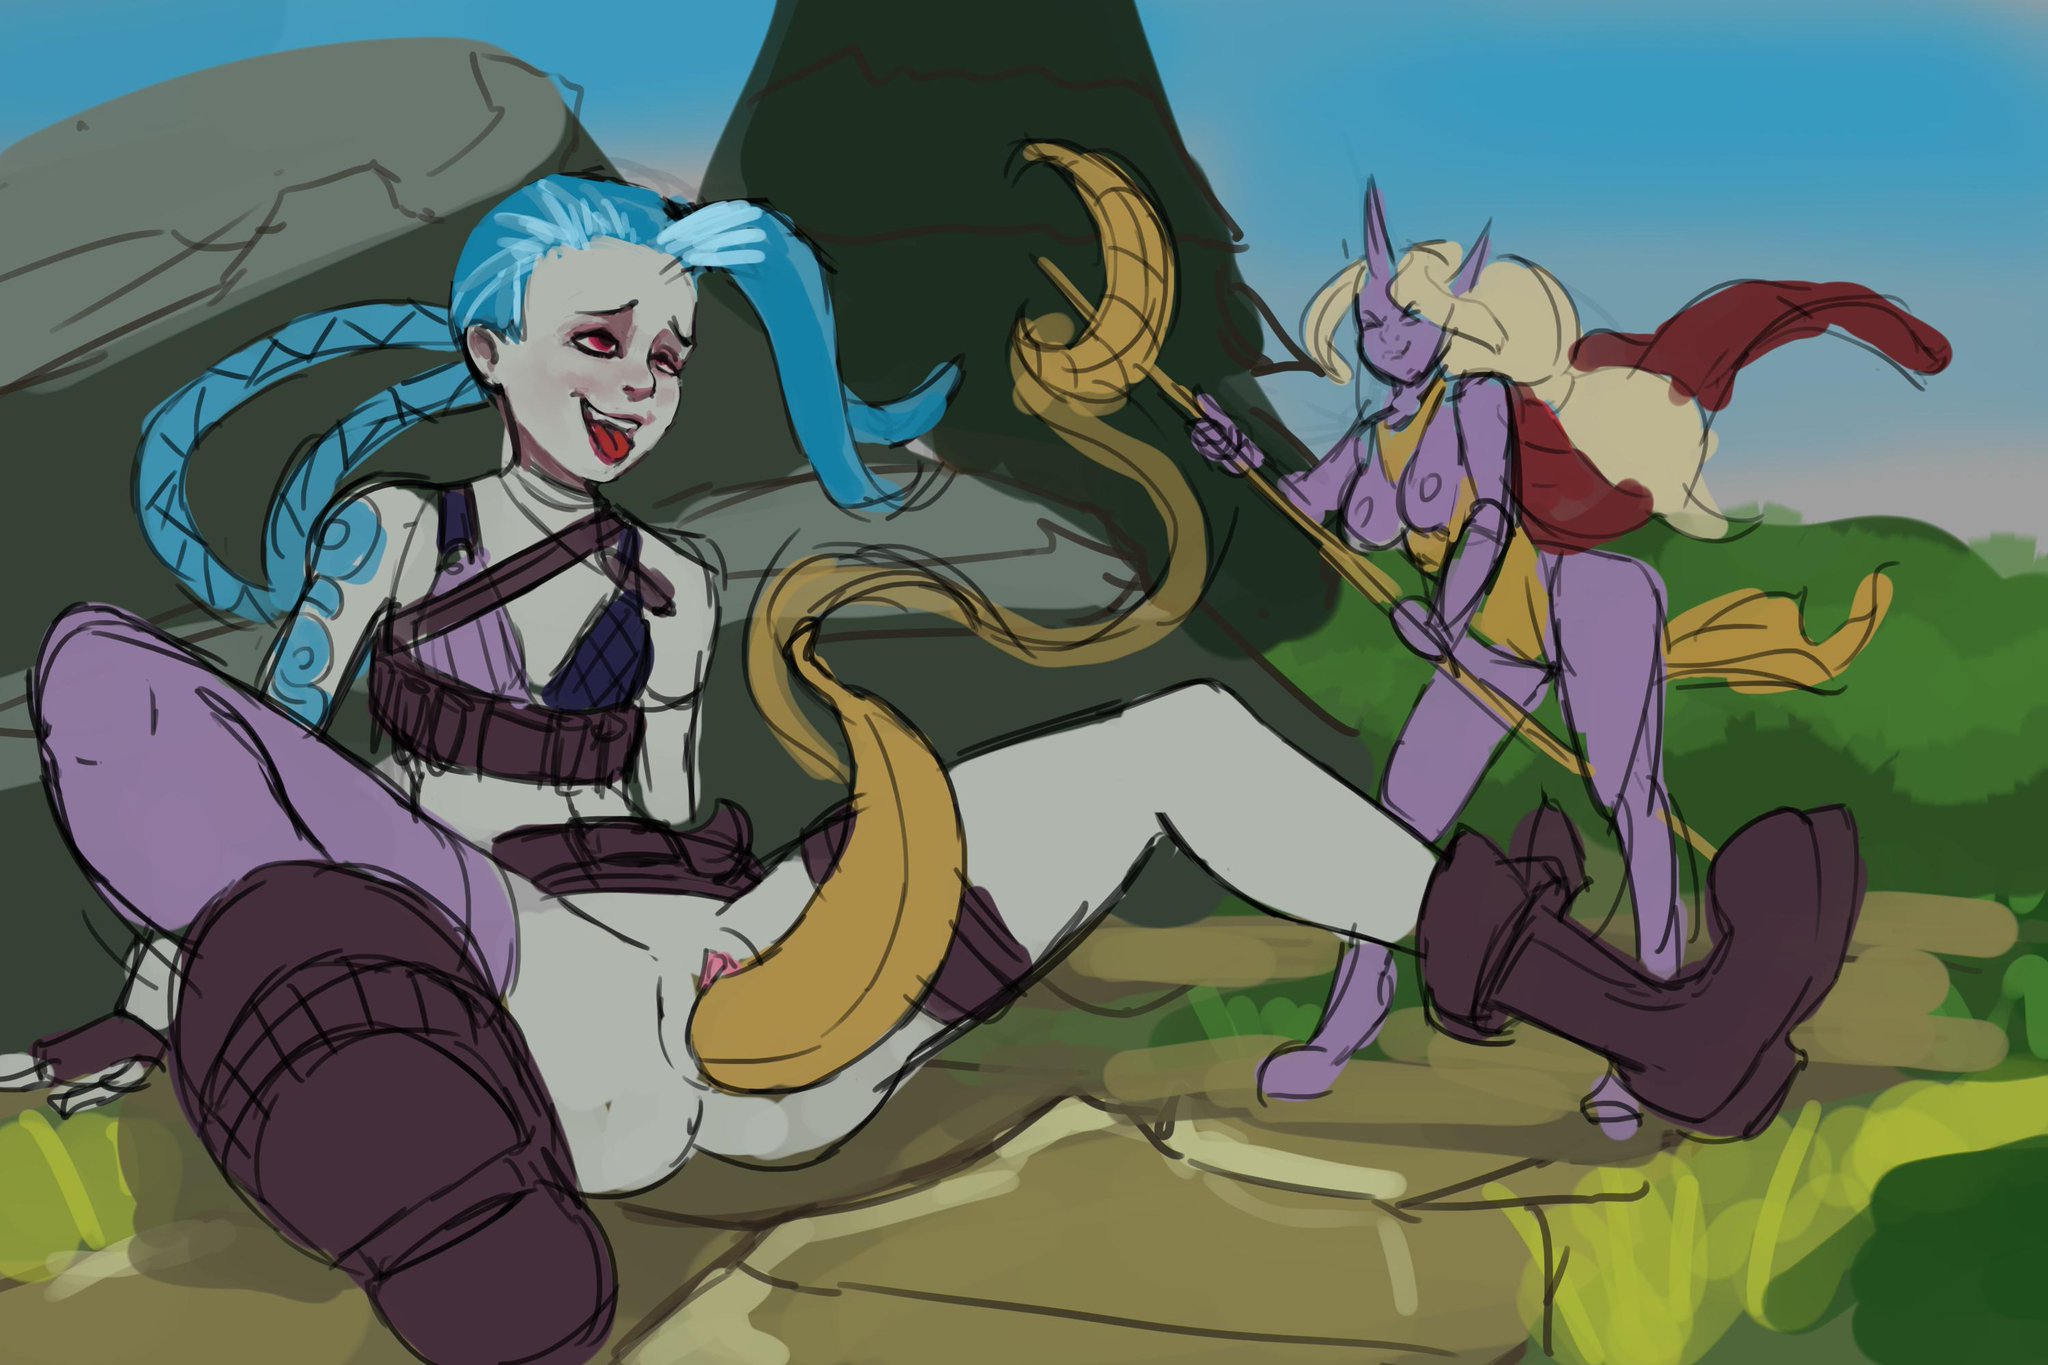 ...10;Here you go, and with Soraka as support ;3

#WIP #LoL...